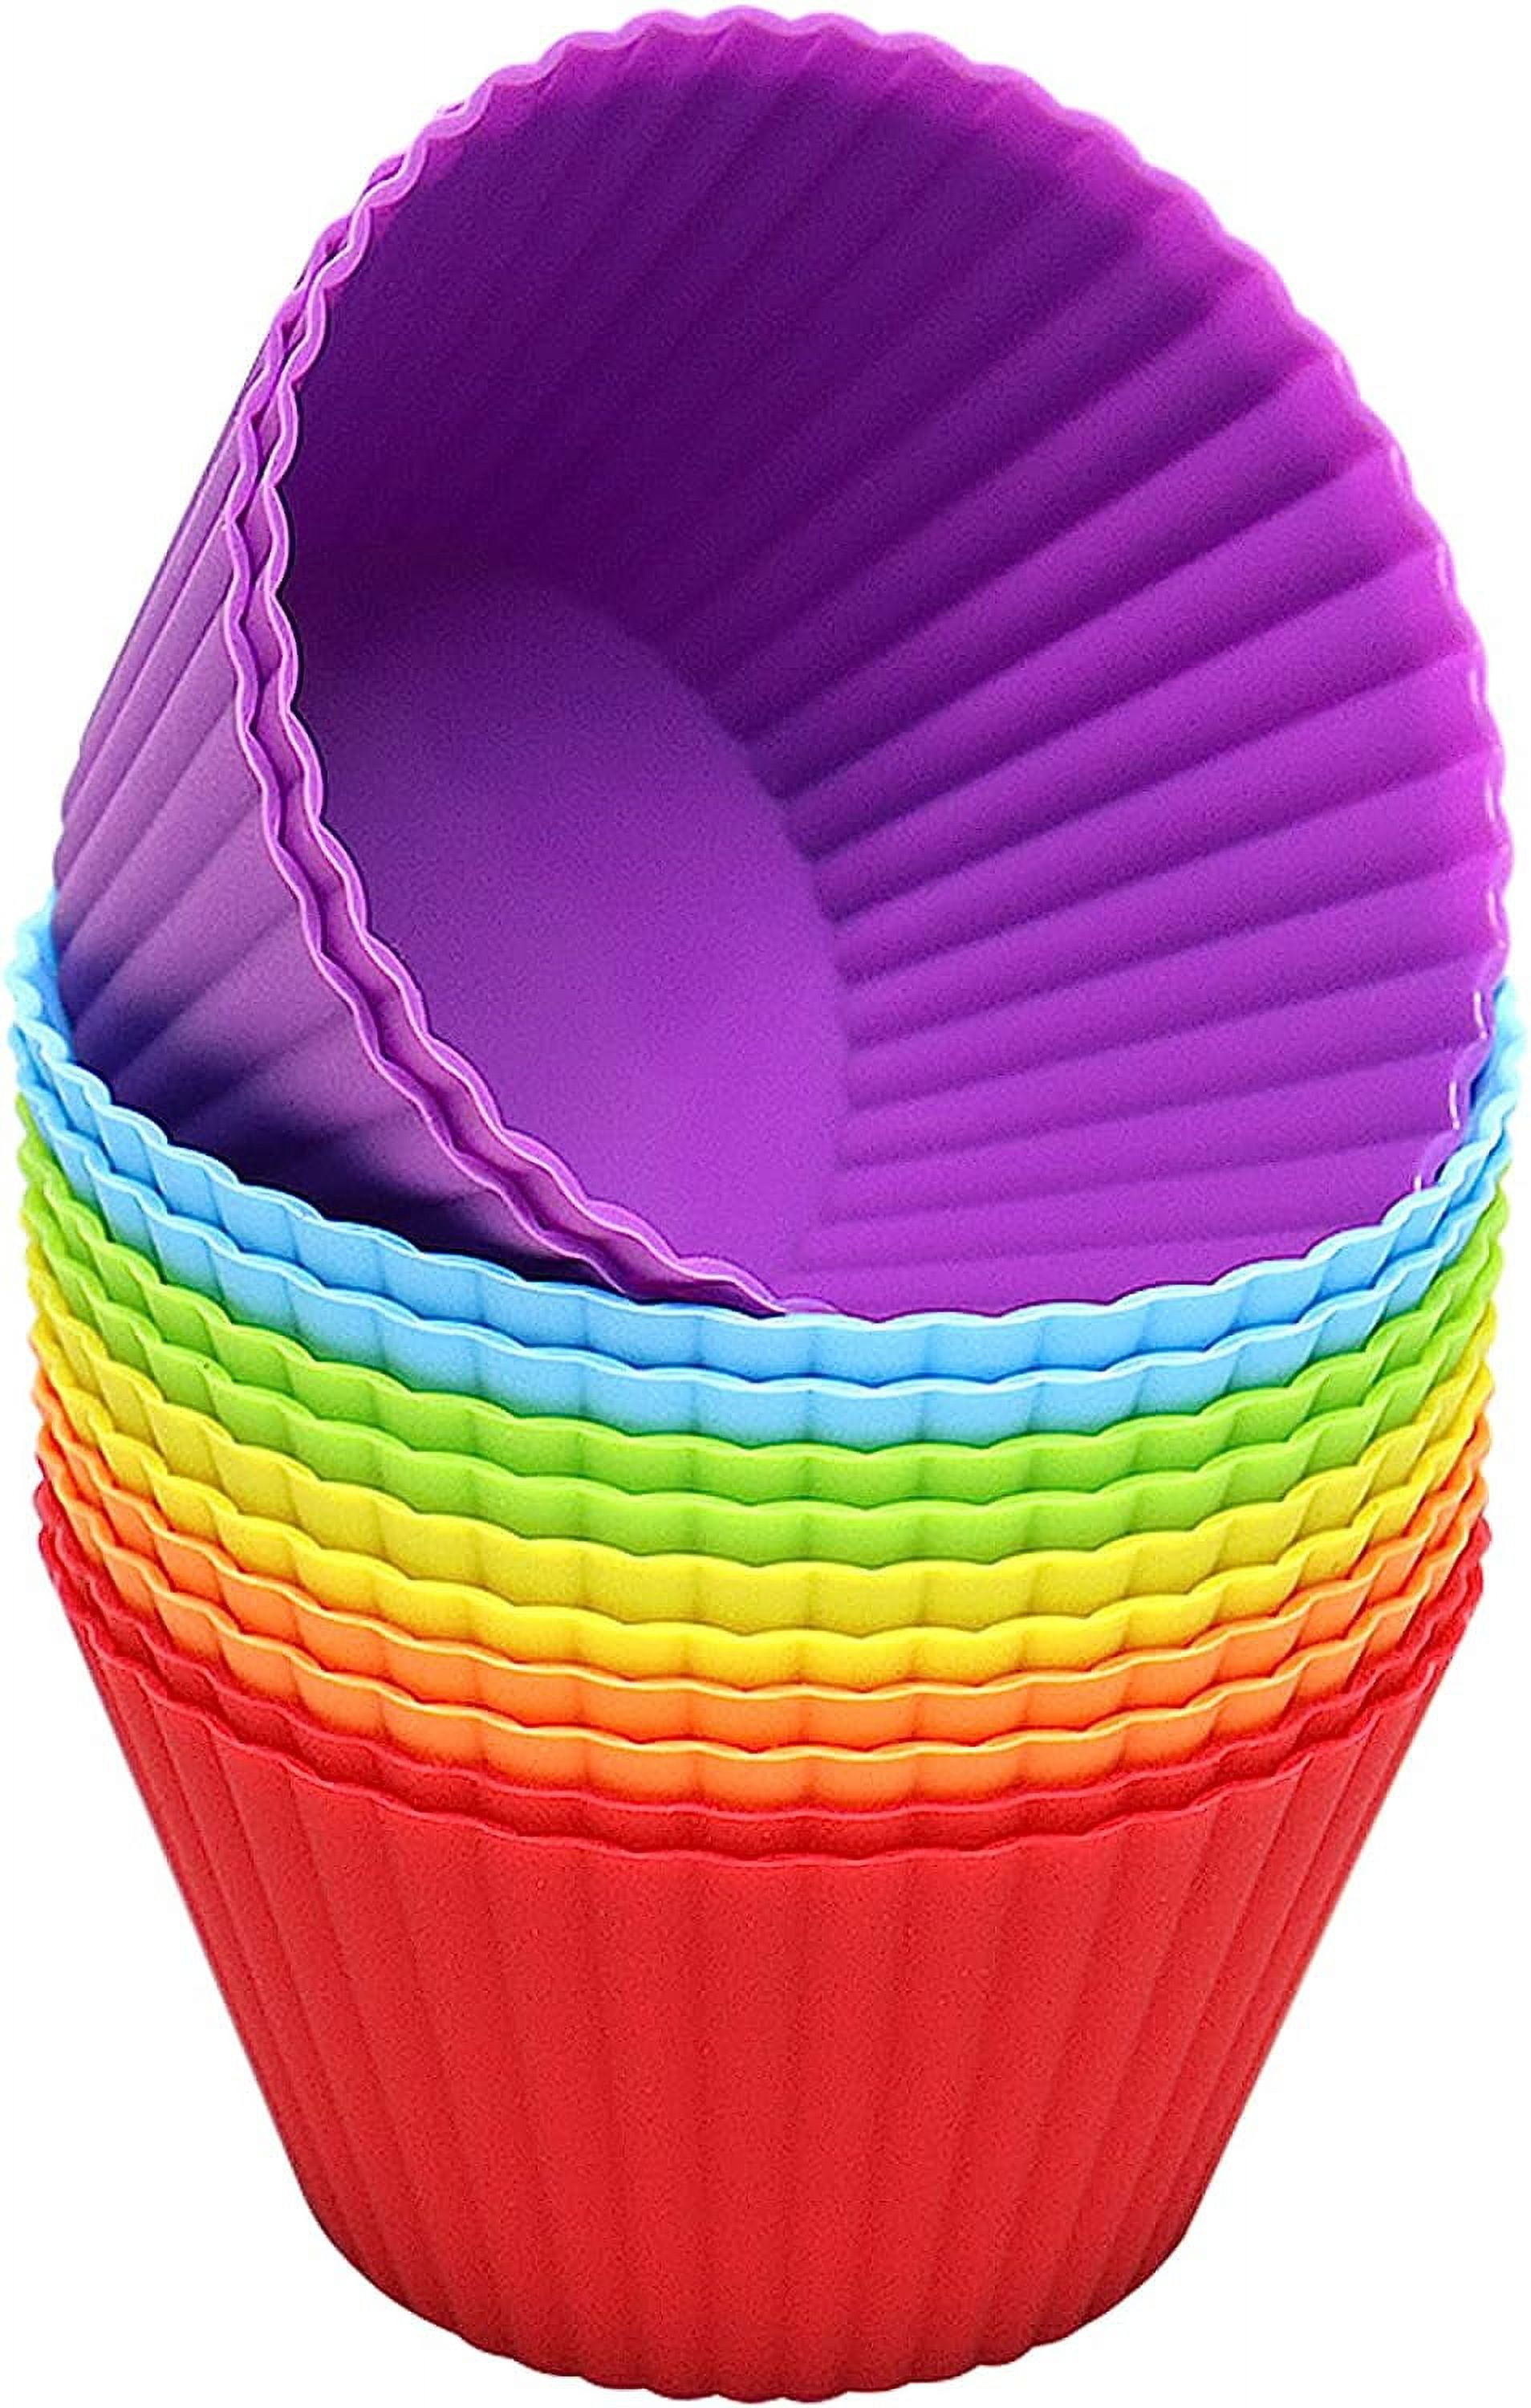 Large Silicone Baking Cups 12 Pack Jumbo Muffin Cup Liners Large 3.54 Inch  Reusa